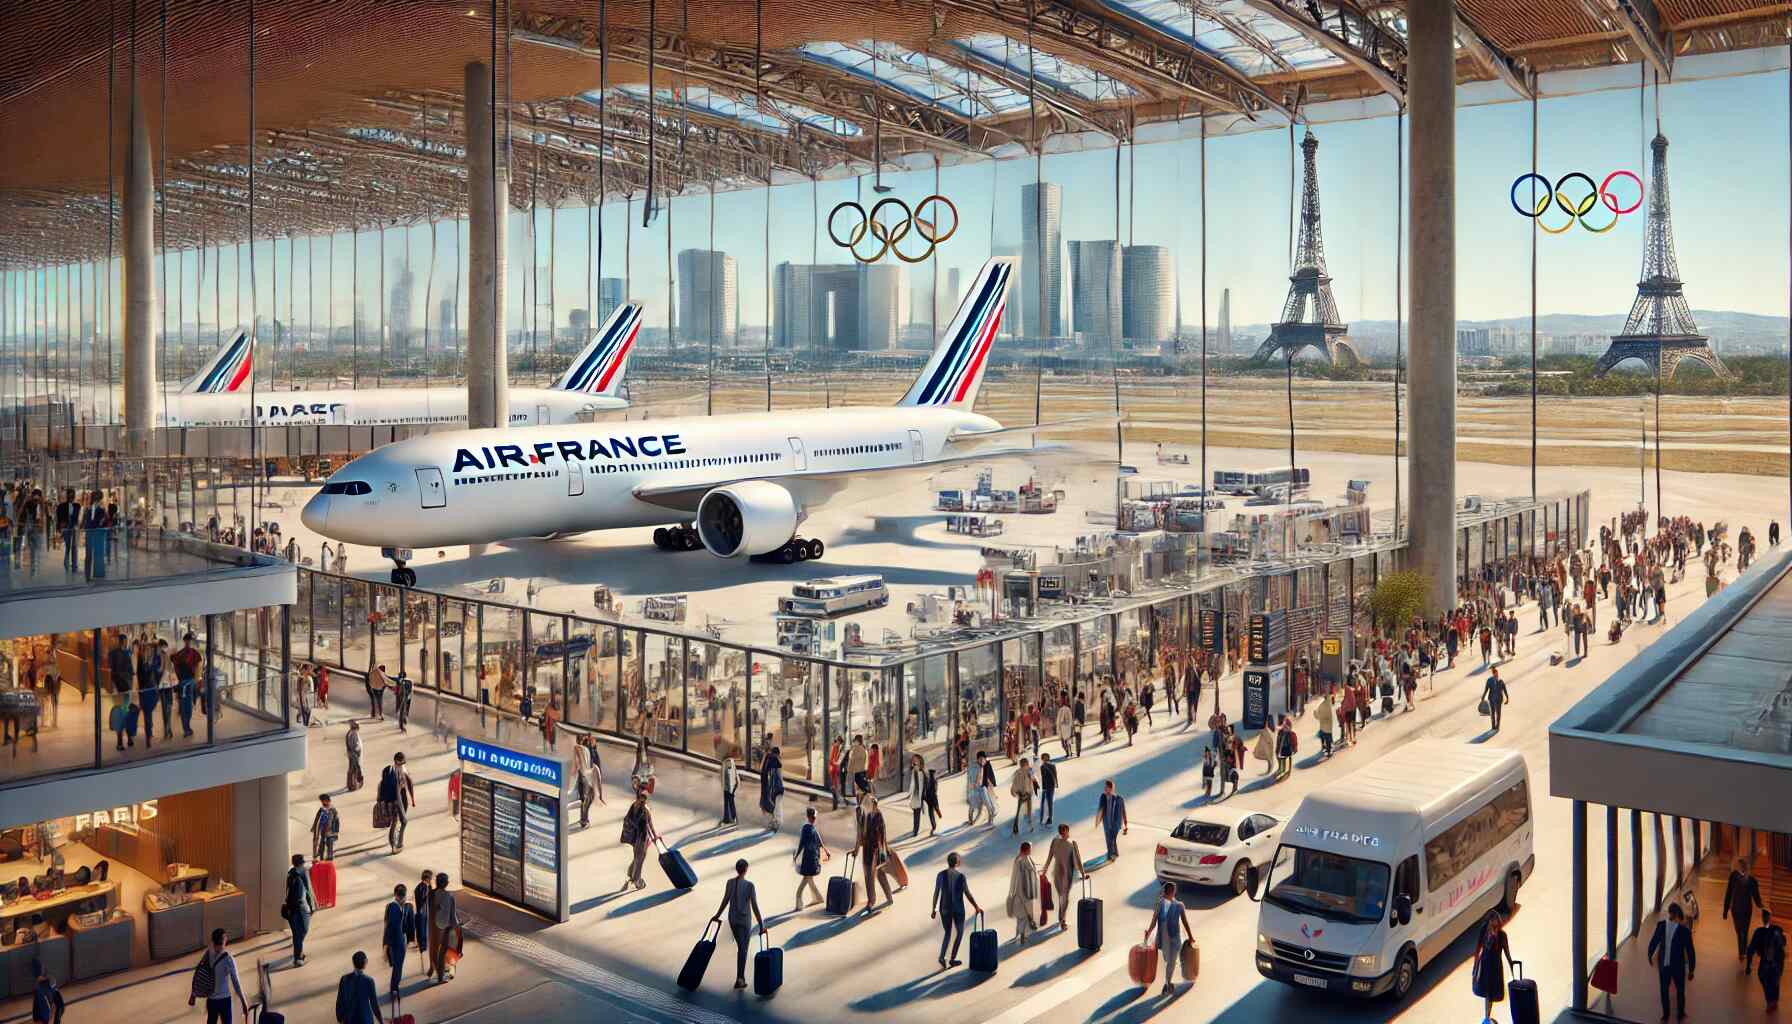 How Air France Eases Trip To Paris Olympics 2024 Tempting Enormous Fans From Over 65 Cities Across Asia, Africa, And The America Via Its Charles de Gaulle Hub